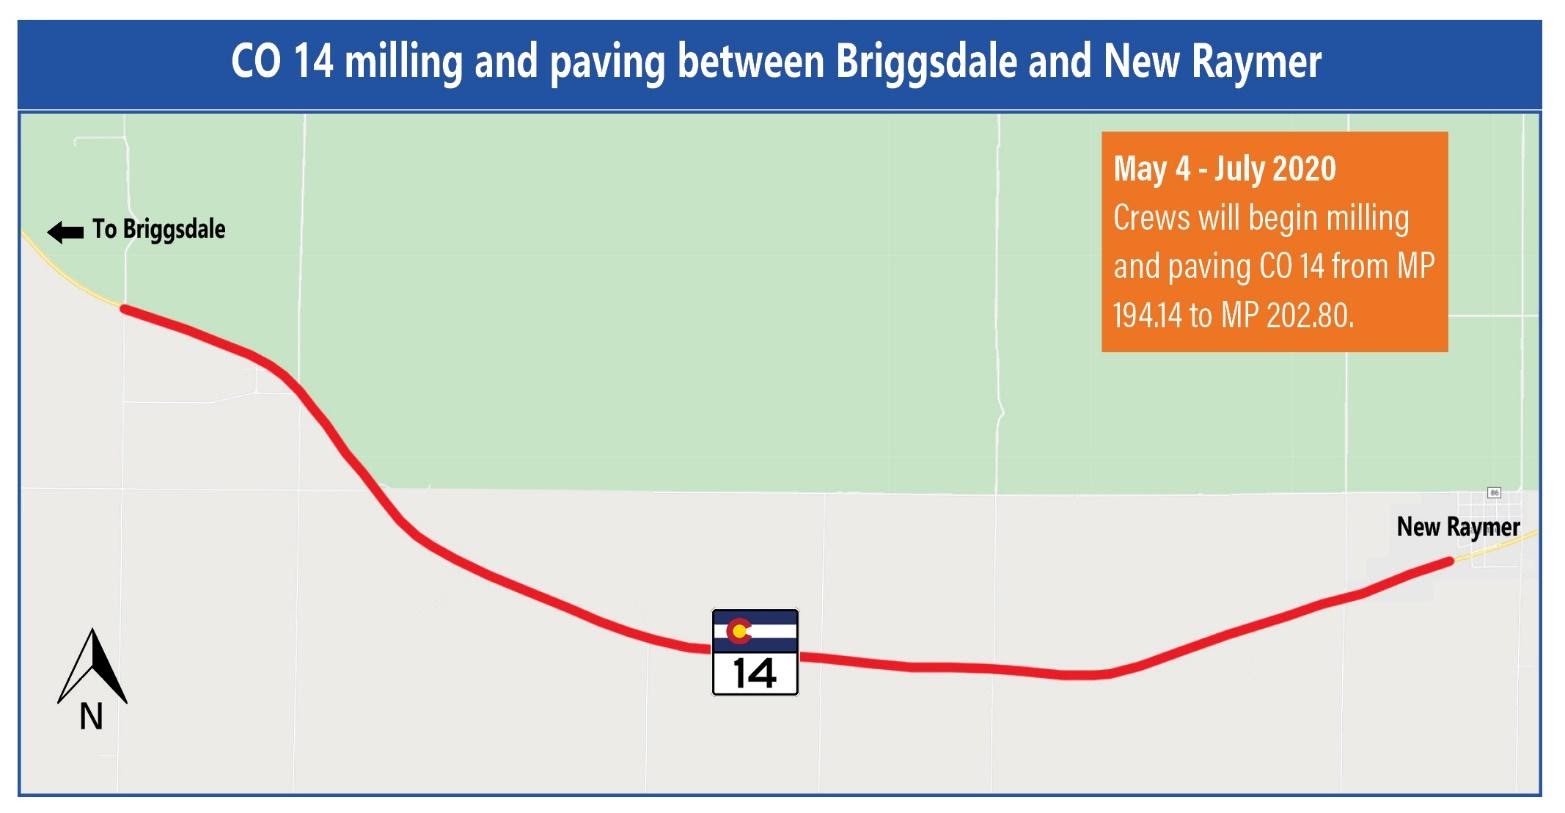 CO 14 milling and paving between Briggsdale and New Raymer May 4 to July 2020 detail image